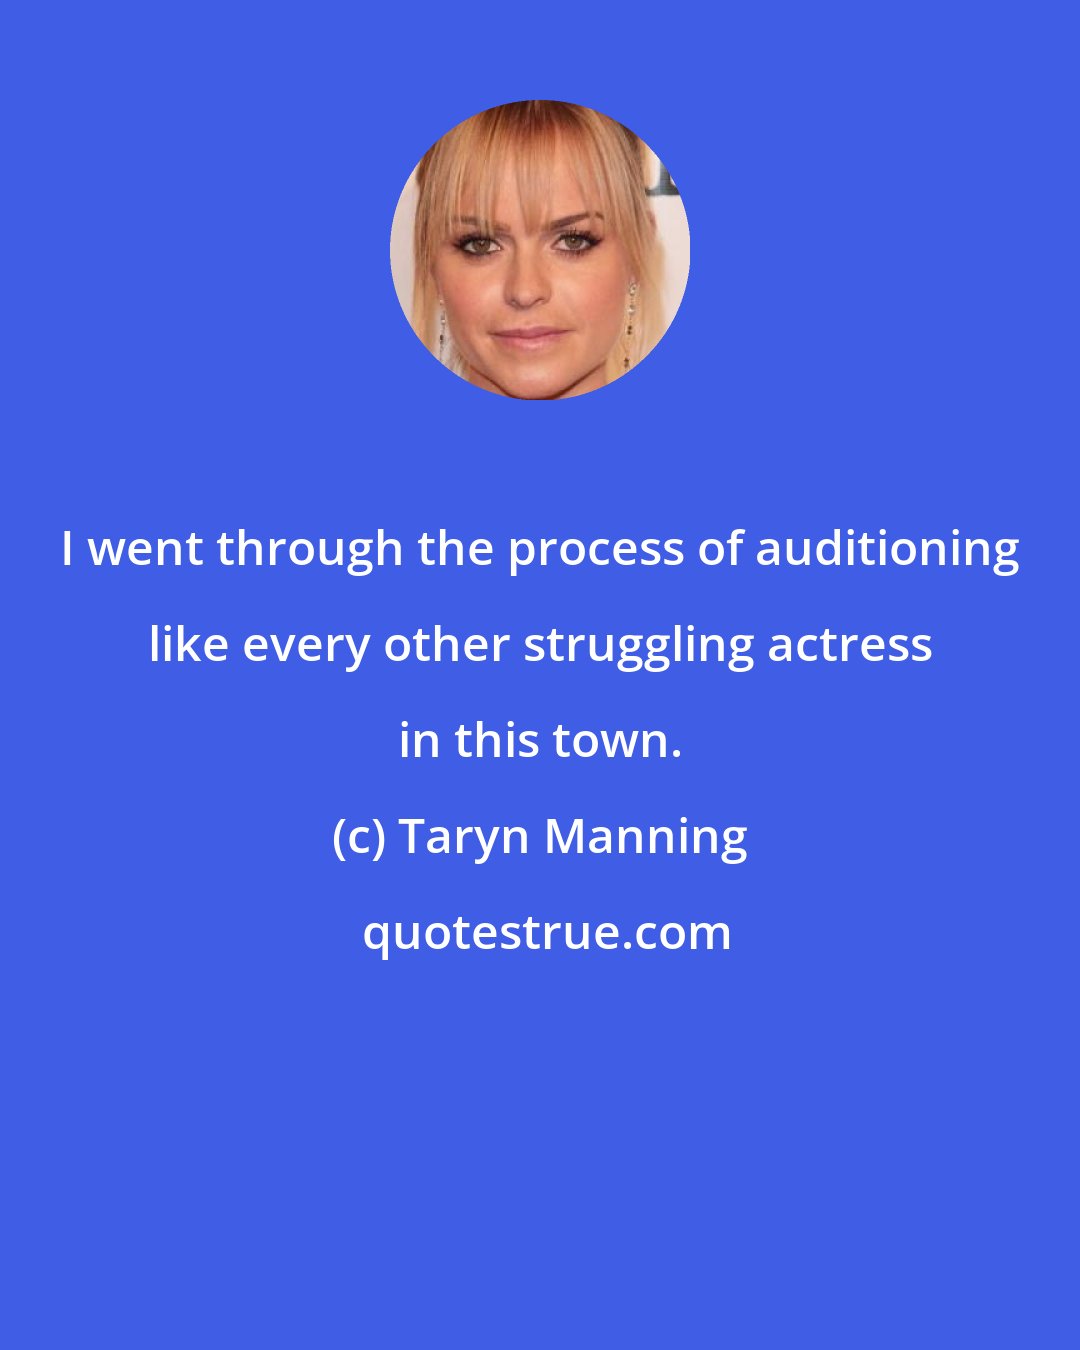 Taryn Manning: I went through the process of auditioning like every other struggling actress in this town.